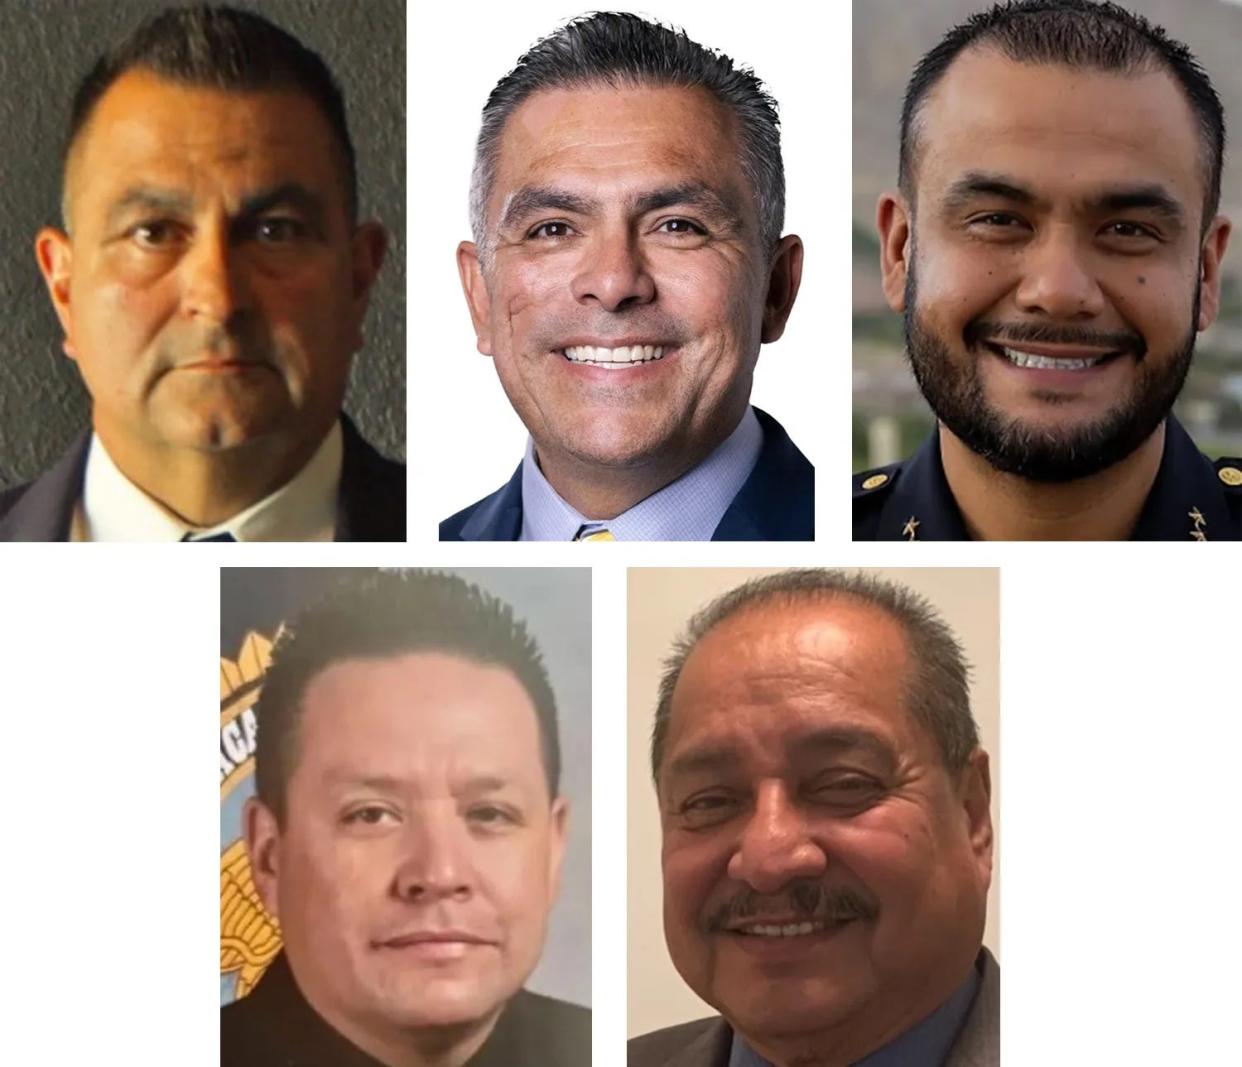 The Democratic candidates for El Paso County sheriff in the March 2024 primary are, from left, Robert "Bobby" Flores, Ryan Urrutia, Oscar Ugarte, Michael Gonzales and Raul Mendiola.